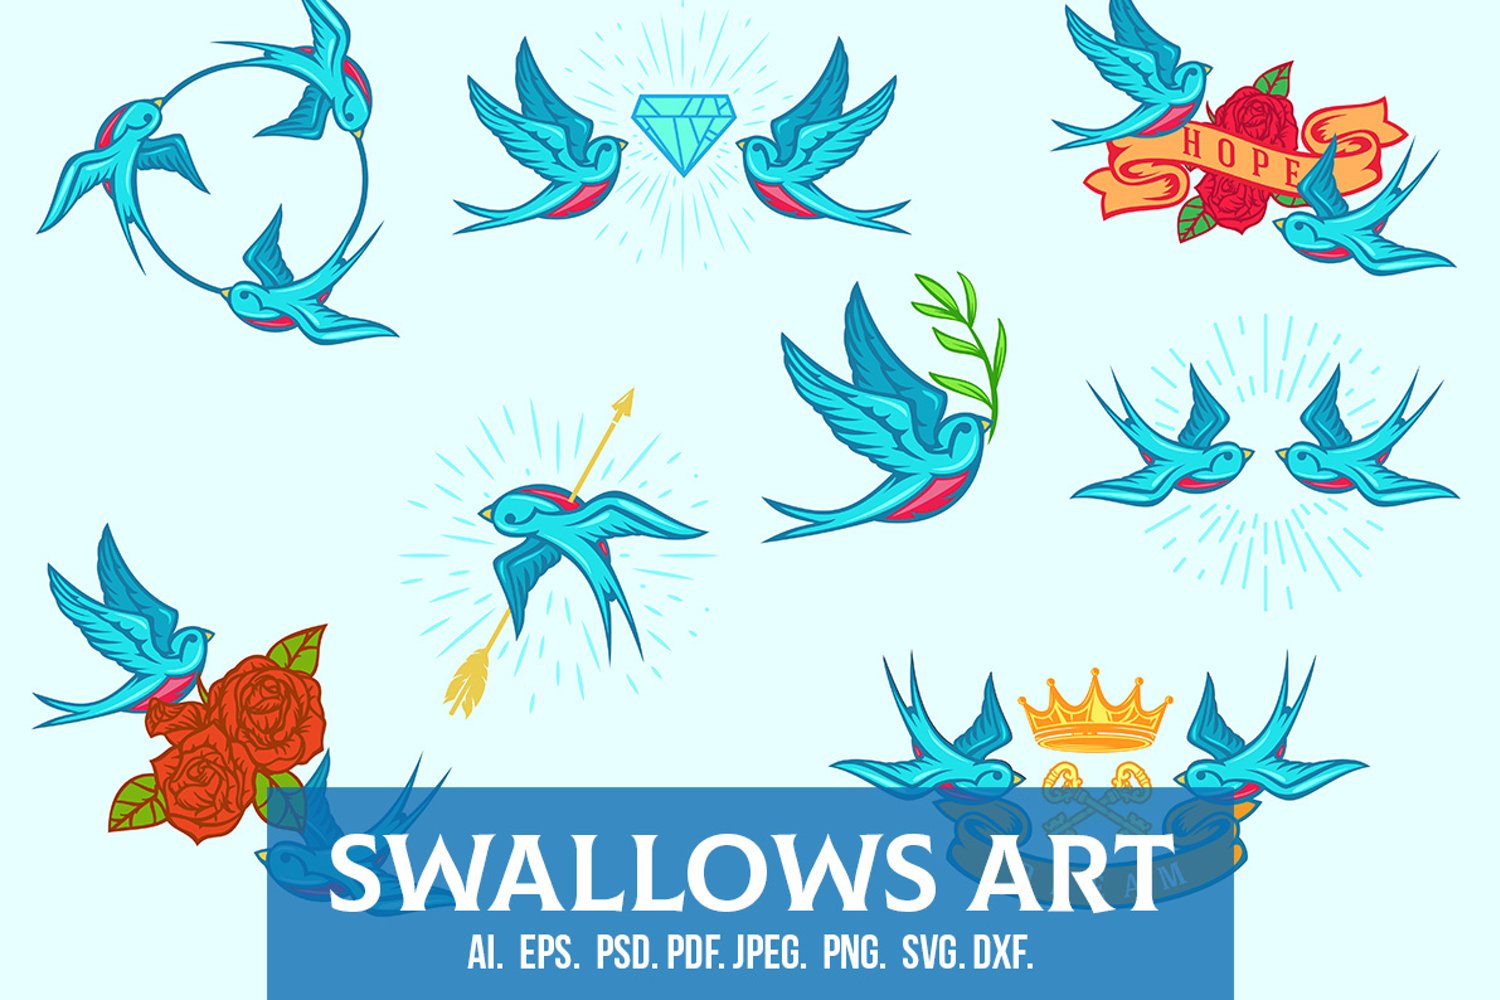 Cover image of Swallows Art Collection.